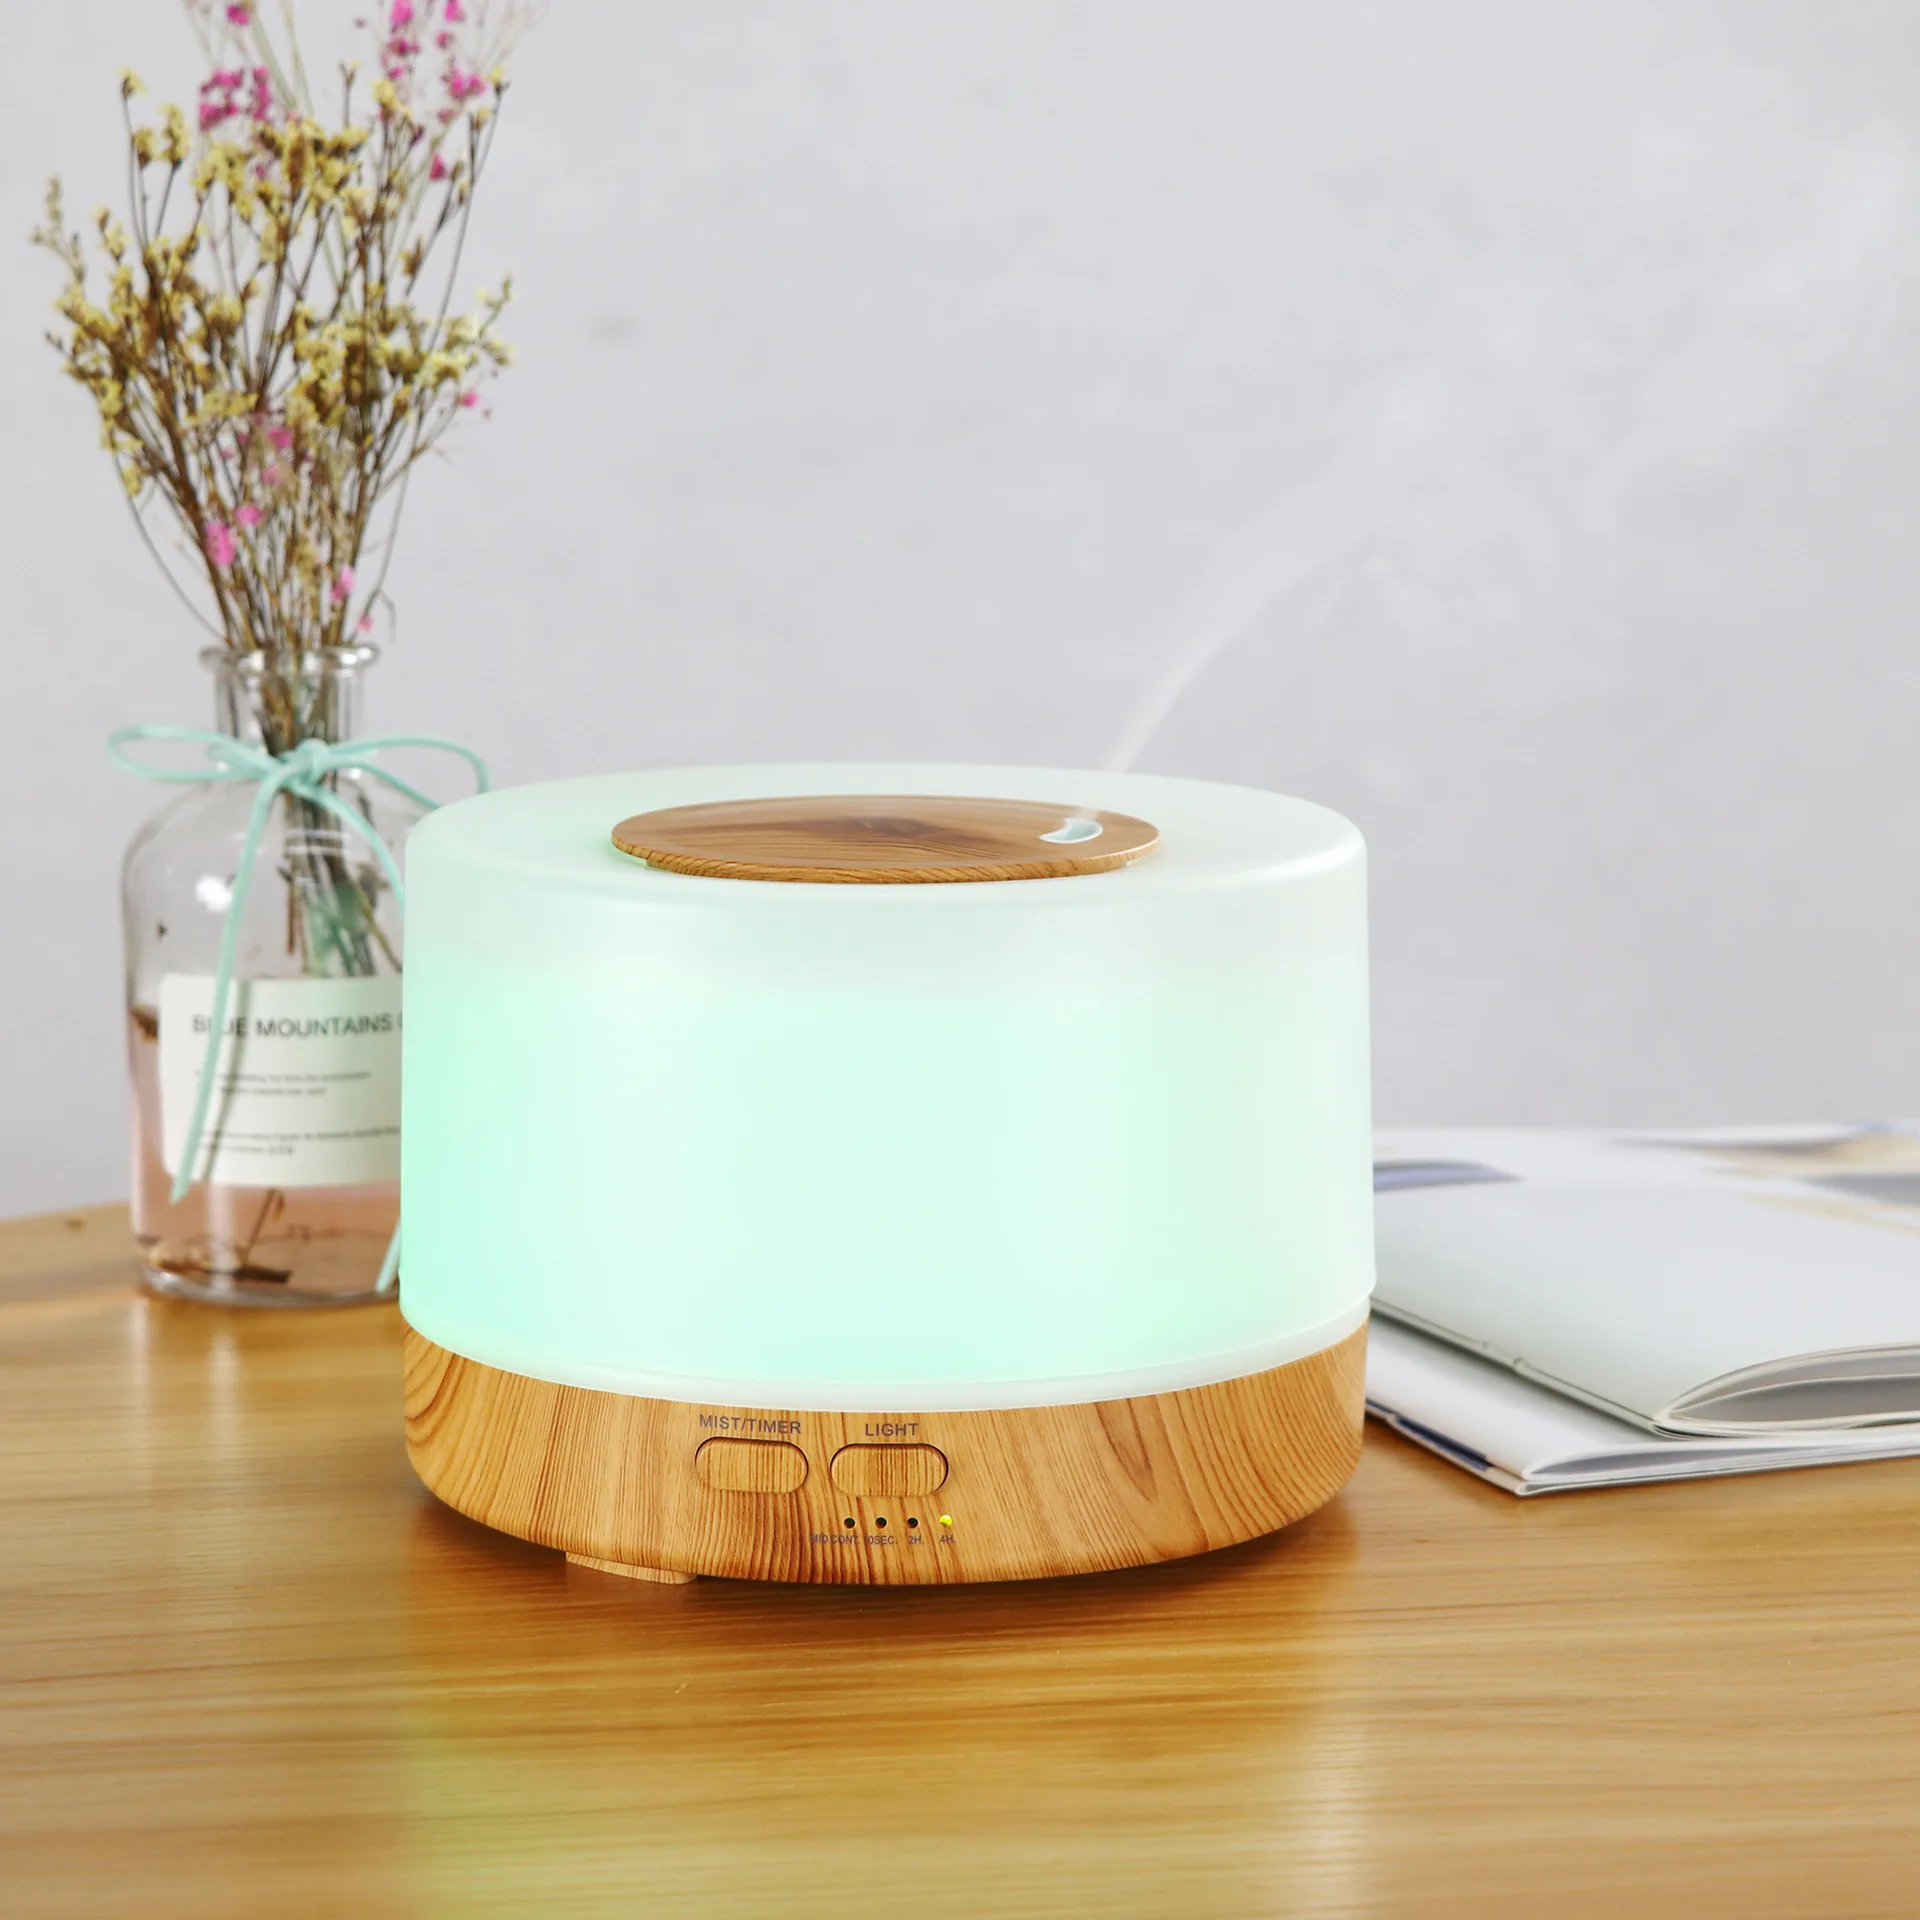 Wifi Aromatherapy Humidification Home Aromatherapy Smart Ultrasonic Atomizer 500ml Colorful Humidifier Diffuser enlarge